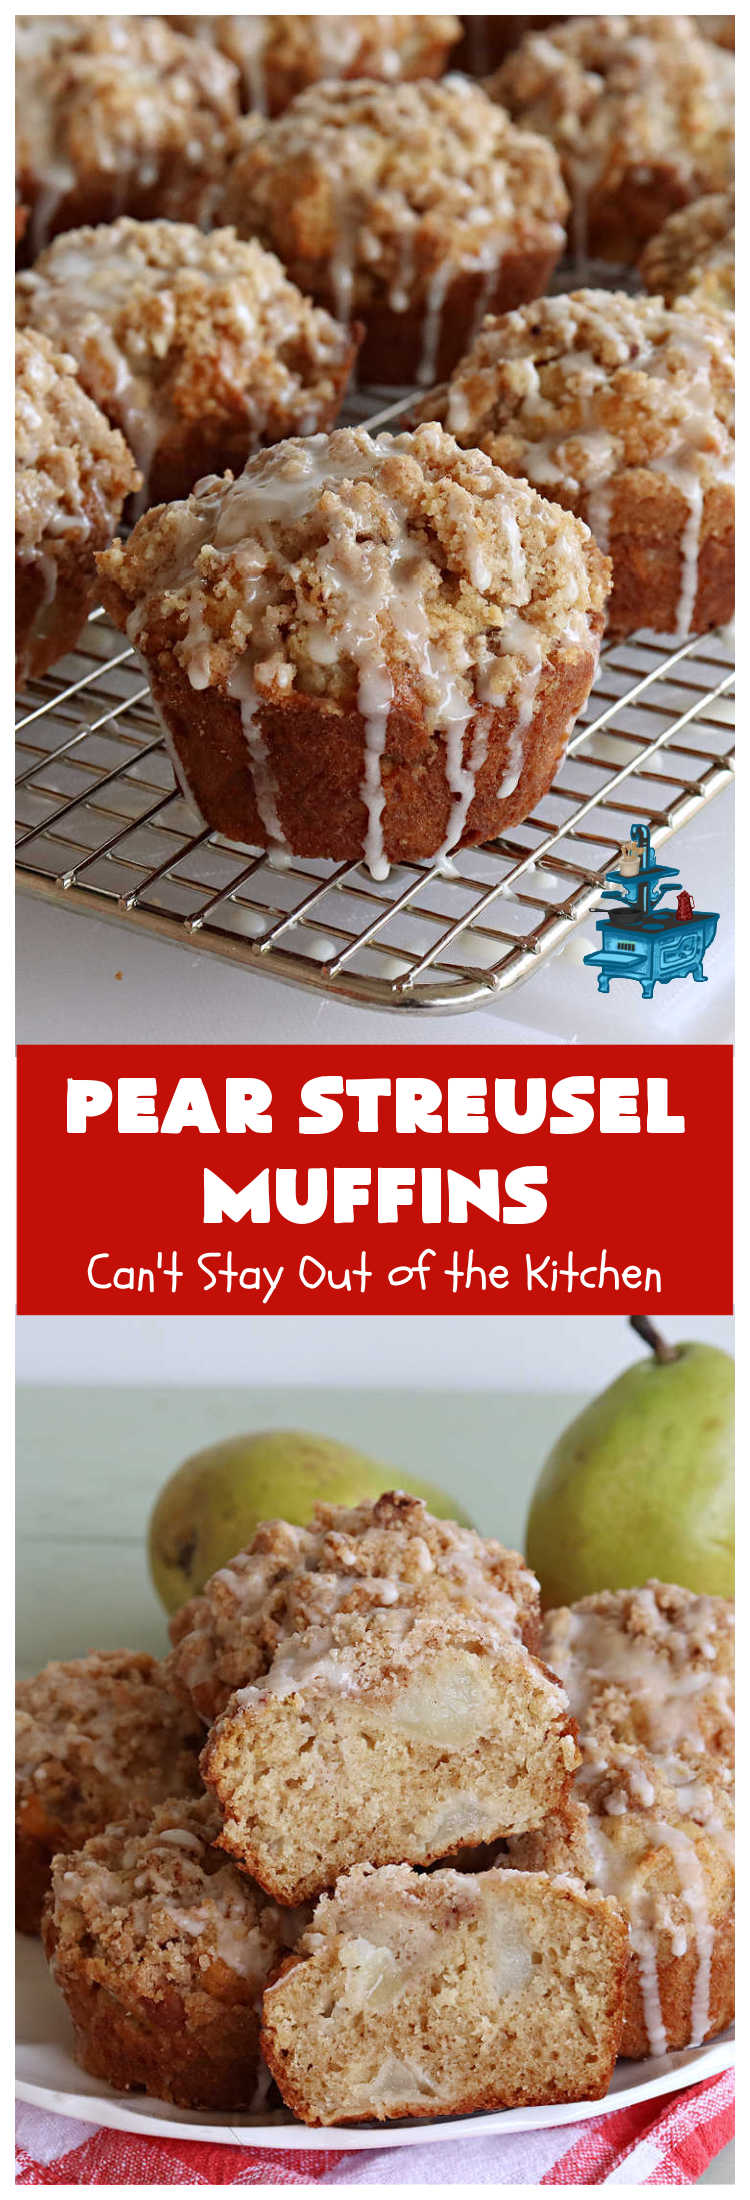 Pear Streusel Muffins | Can't Stay Out of the Kitchen | these spectacular #muffins are filled with #pears, & #yogurt to keep them moist. Spices like #cloves, #cinnamon & #allspice amp up the flavors without overwhelming the muffins. The #StreuselTopping provides texture & the glaze a little more sweetness to make these muffins a drool-worthy experience! Great for a weekend, company or #holiday #breakfast. #PearStreuselMuffins